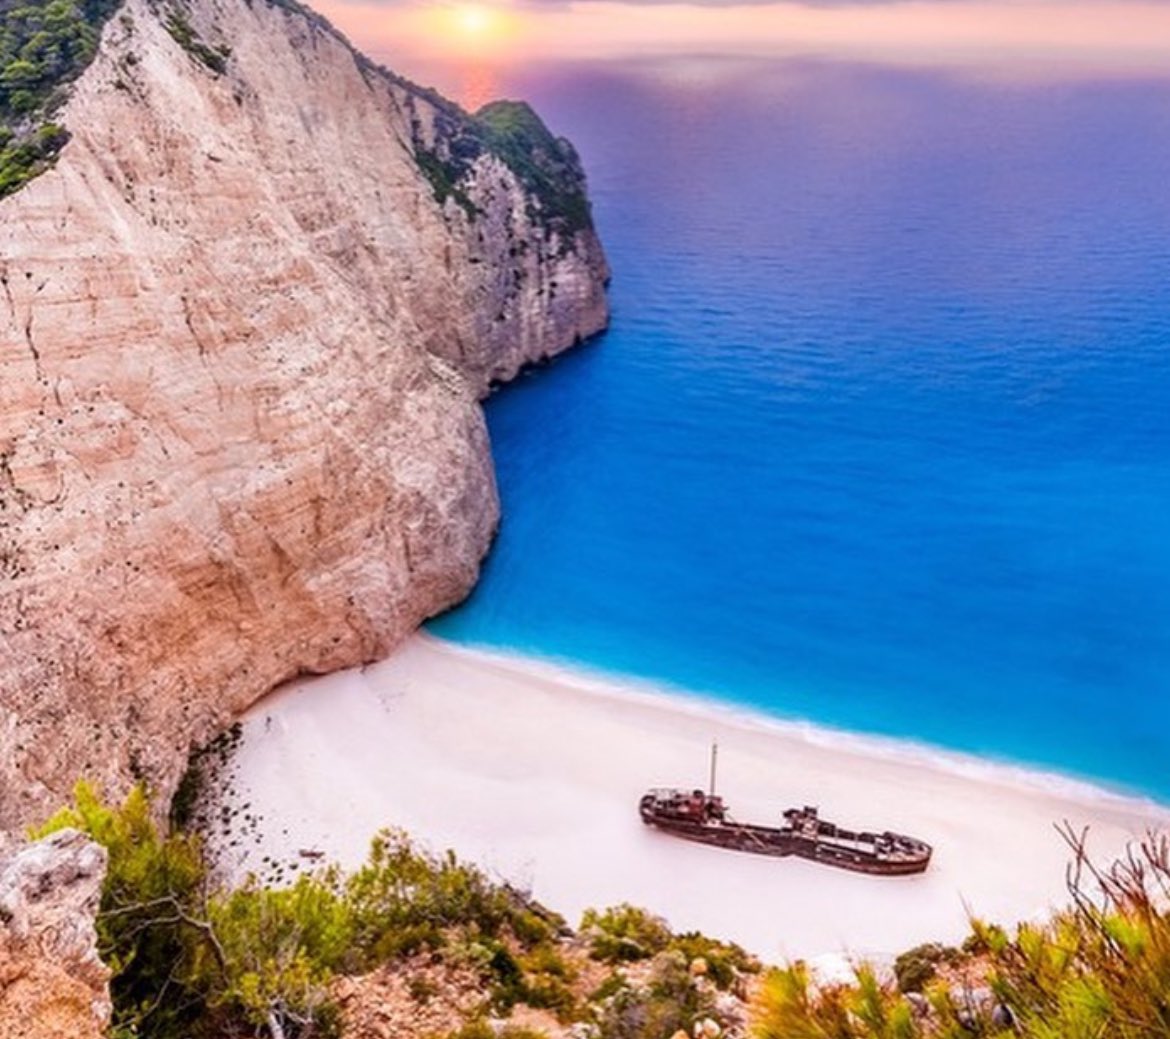 The Panagiotis is a shipwreck lying abandoned on Navagio Beach in Greece. It is a stunning island off the southwest coast of Greece, boasting magnificent beaches, secluded coves, and verdant valleys. While the island is known for its natural beauty, it is perhaps most famous…